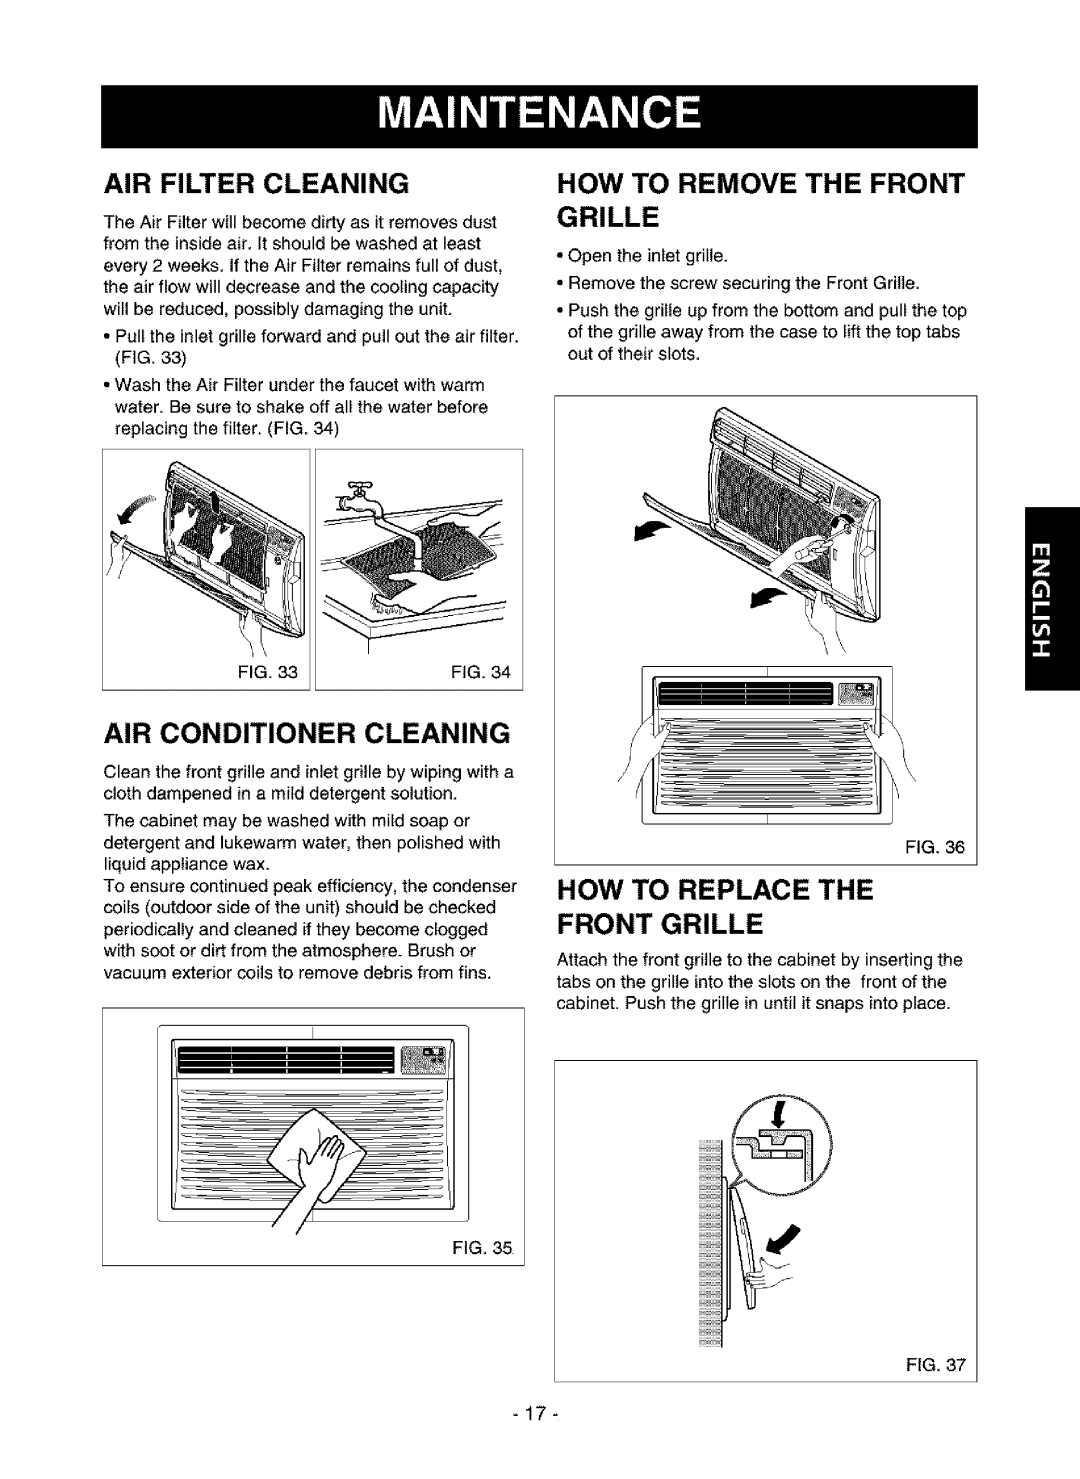 Kenmore 580.75116, 580.75135, 580.75085 Air Filter Cleaning, How To Remove The Front Grille, Air Conditioner Cleaning 